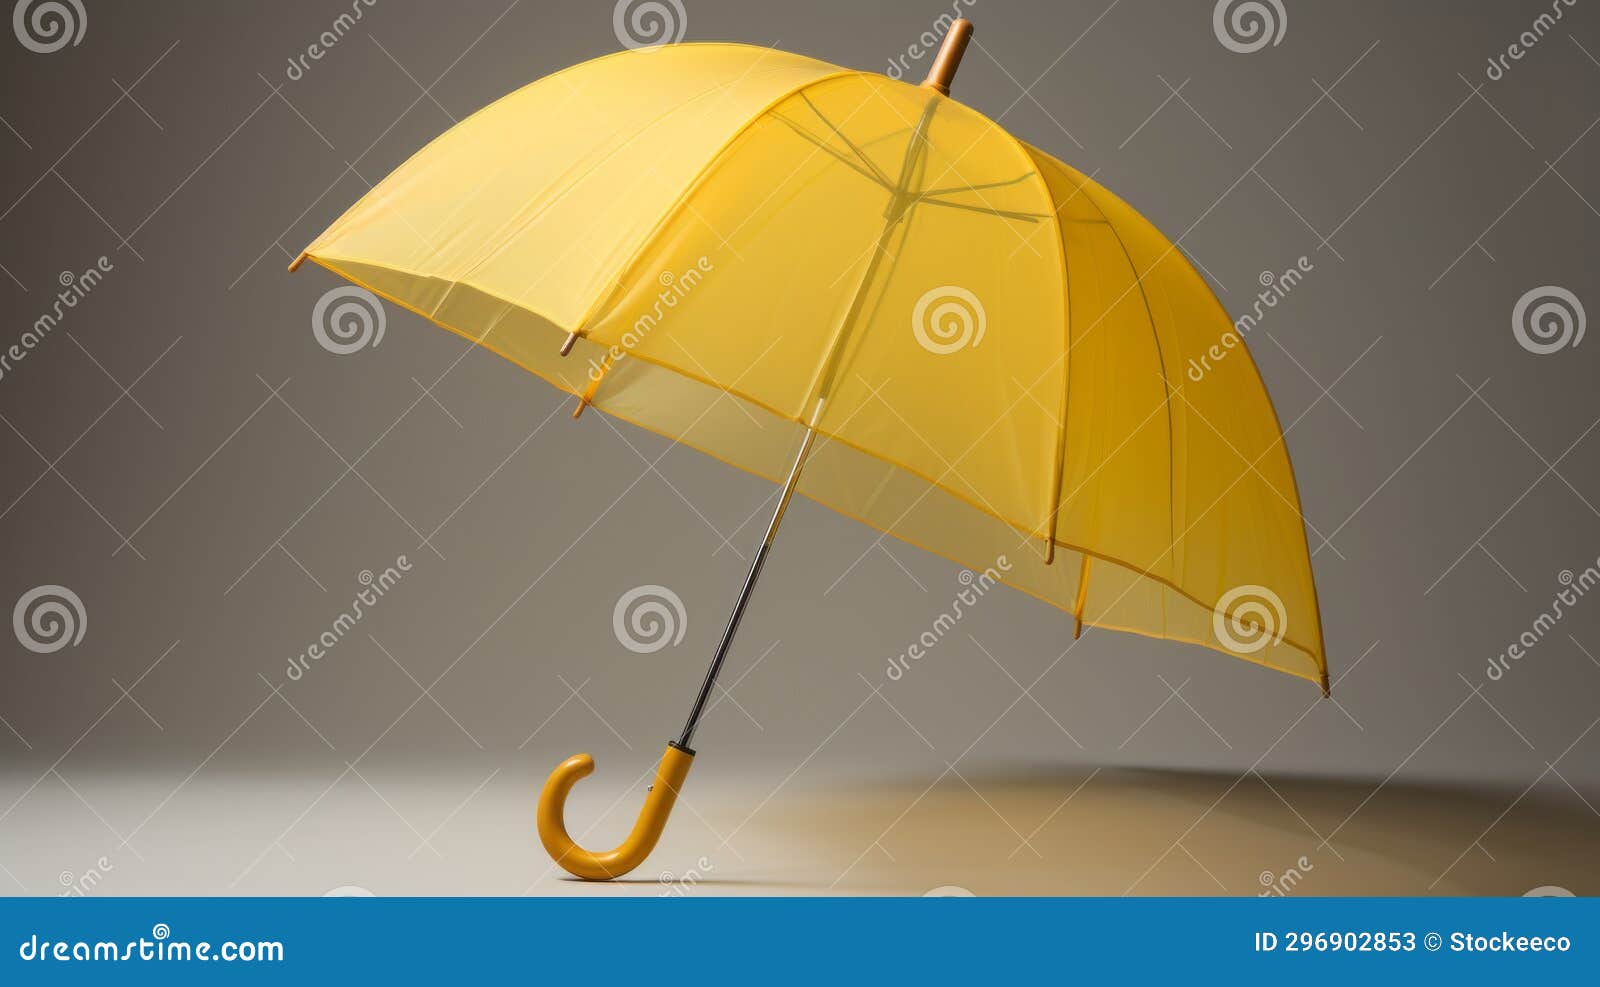 https://thumbs.dreamstime.com/z/yellow-umbrella-zbrush-style-precise-hyperrealism-smooth-curves-fashionable-has-streamlined-appearance-simple-296902853.jpg